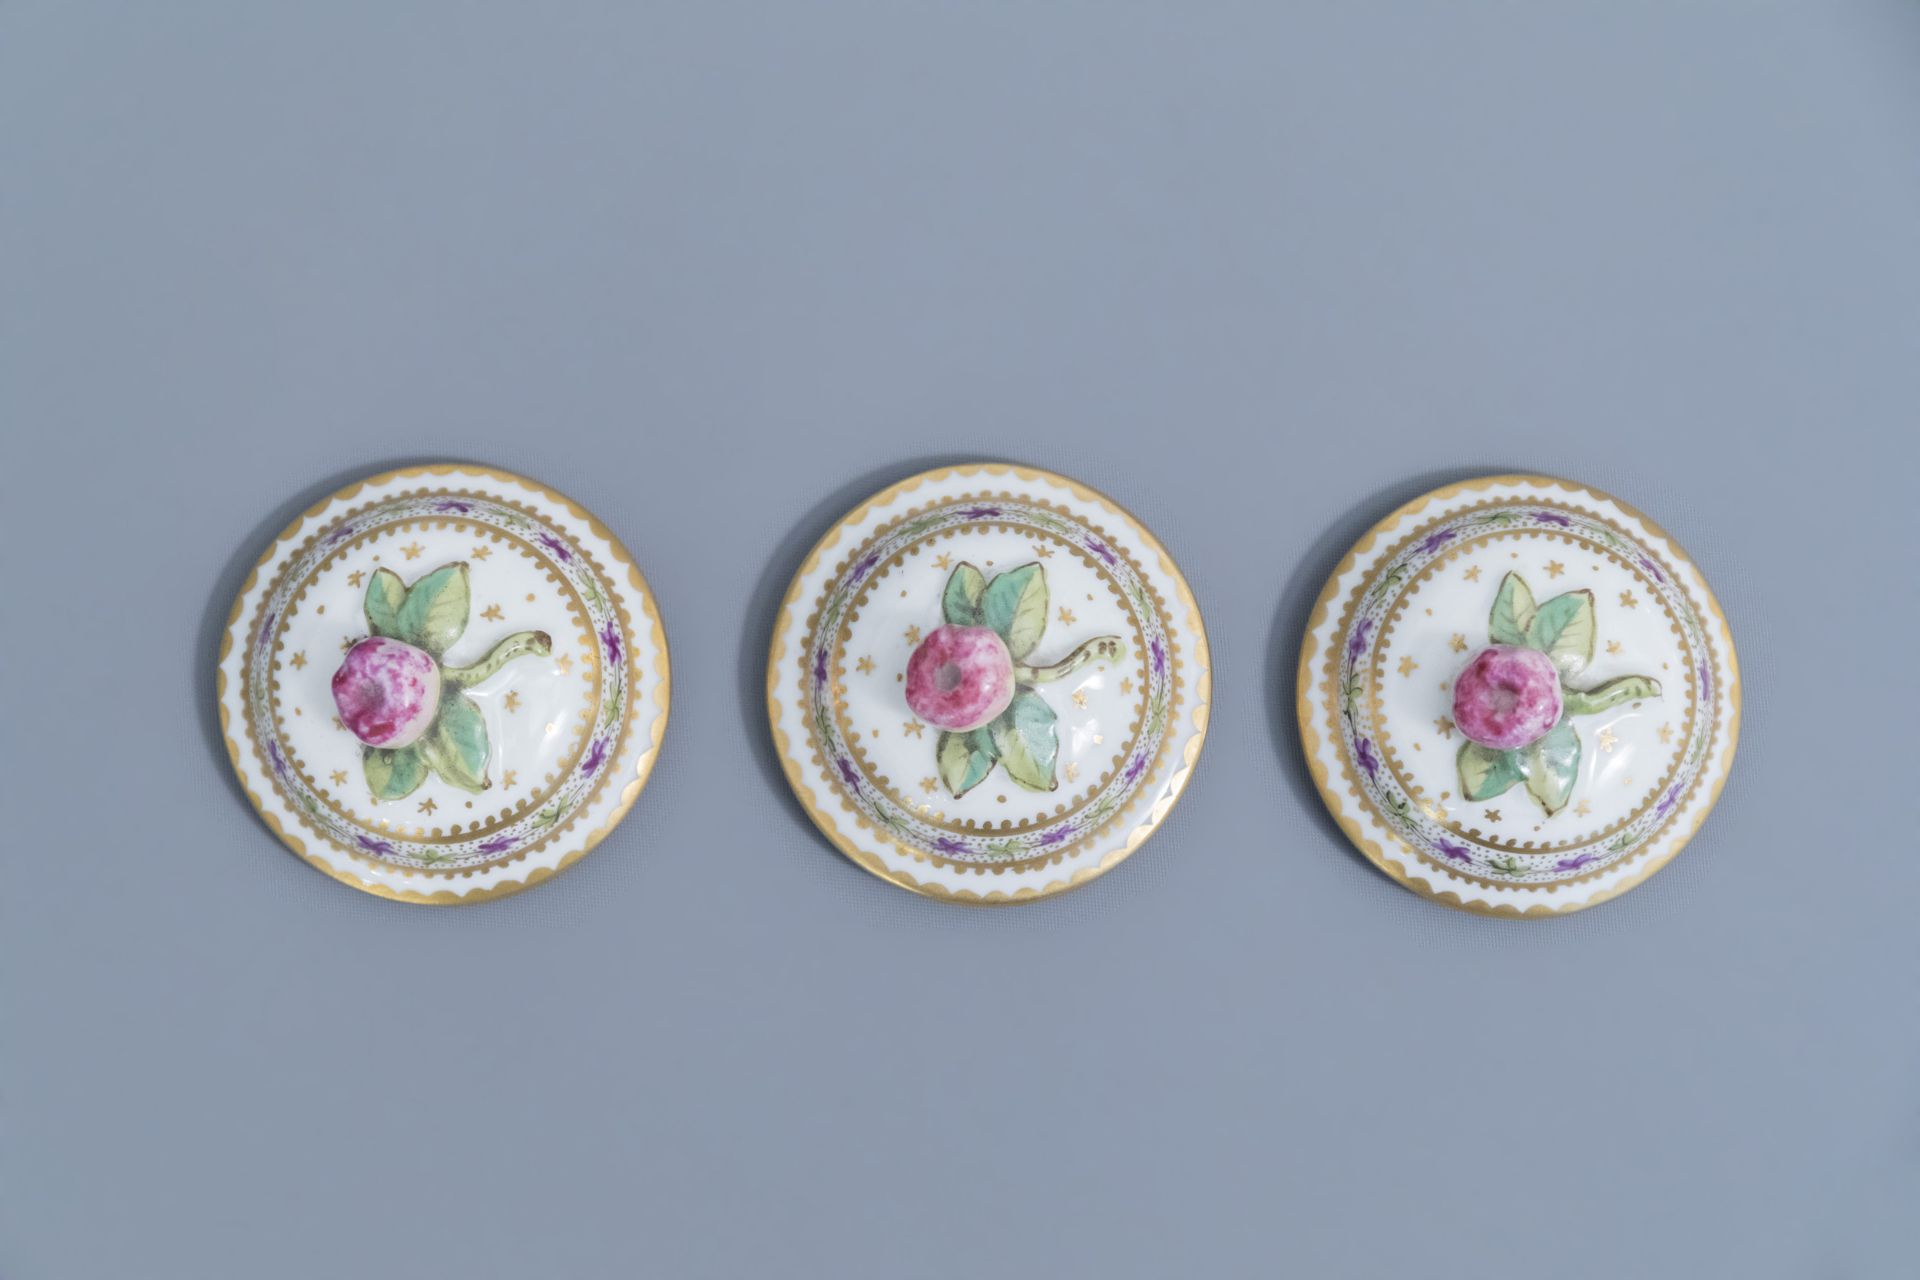 A pair of bue and white faience fine salts and five cream jars, Luxemburg and France, 18th/19th C. - Image 15 of 46